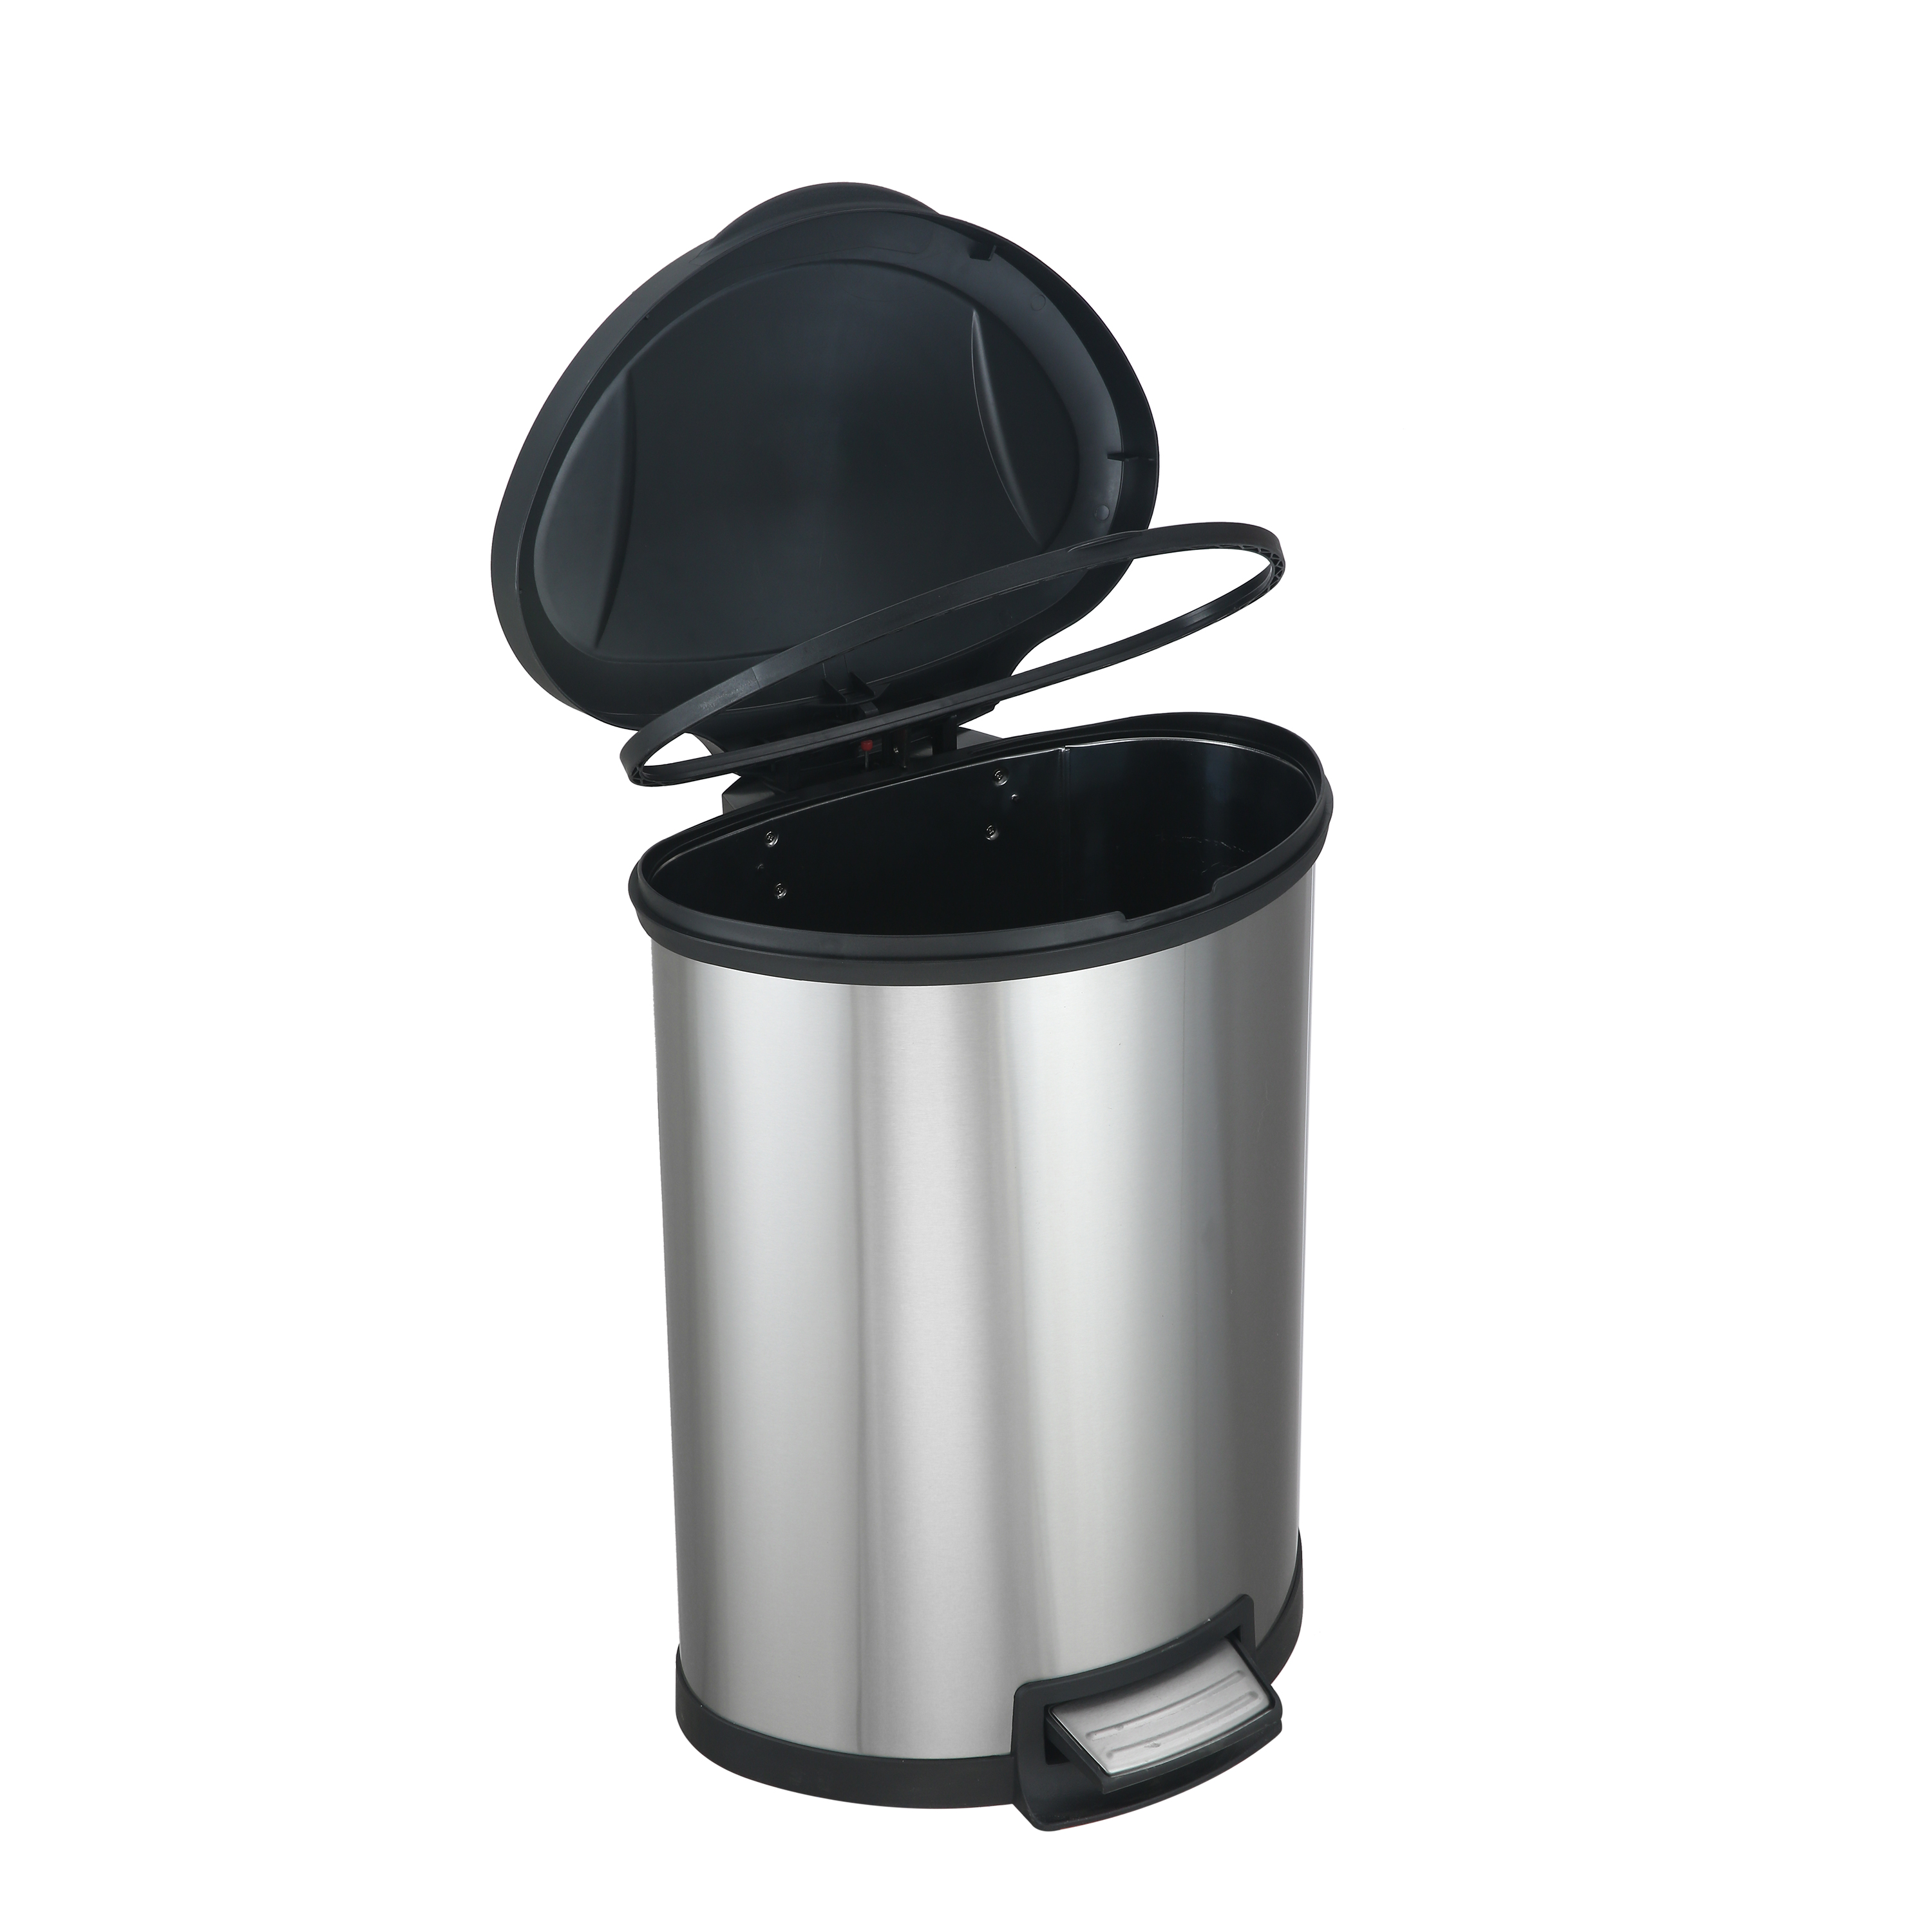 Mainstays 14.2 gal/54 Liter Stainless Steel Semi Round Kitchen Garbage Can with Lid - image 4 of 5